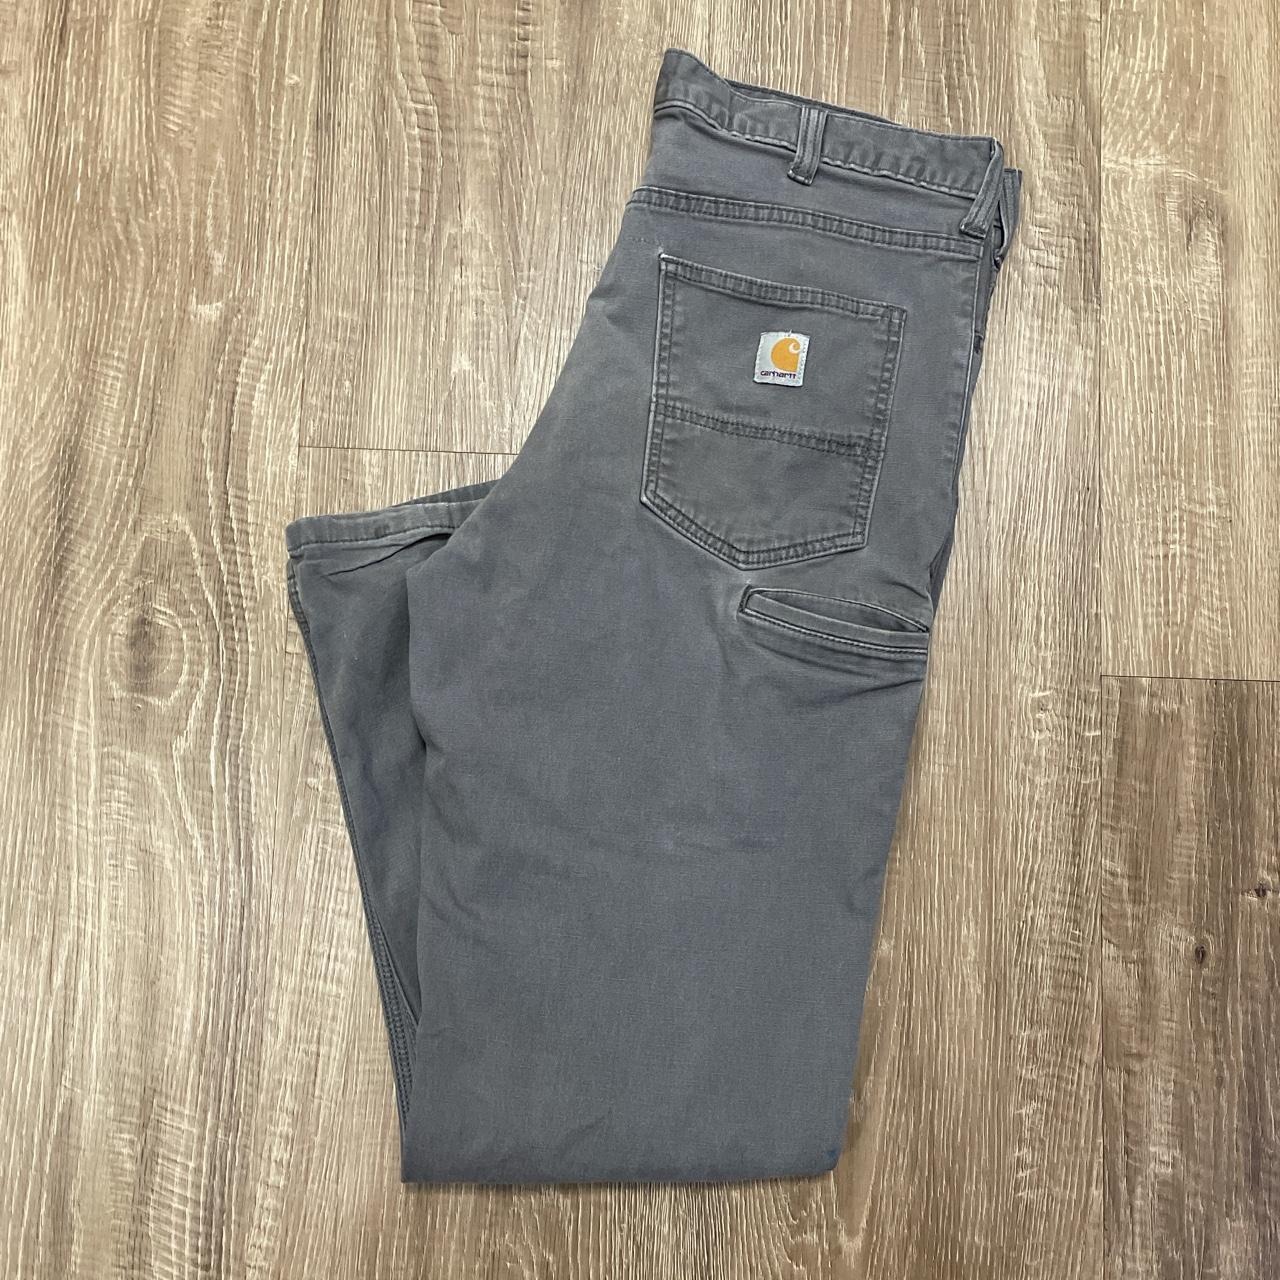 2K Charcoal Grey Carhartt Relaxed Fit Work Pants... - Depop